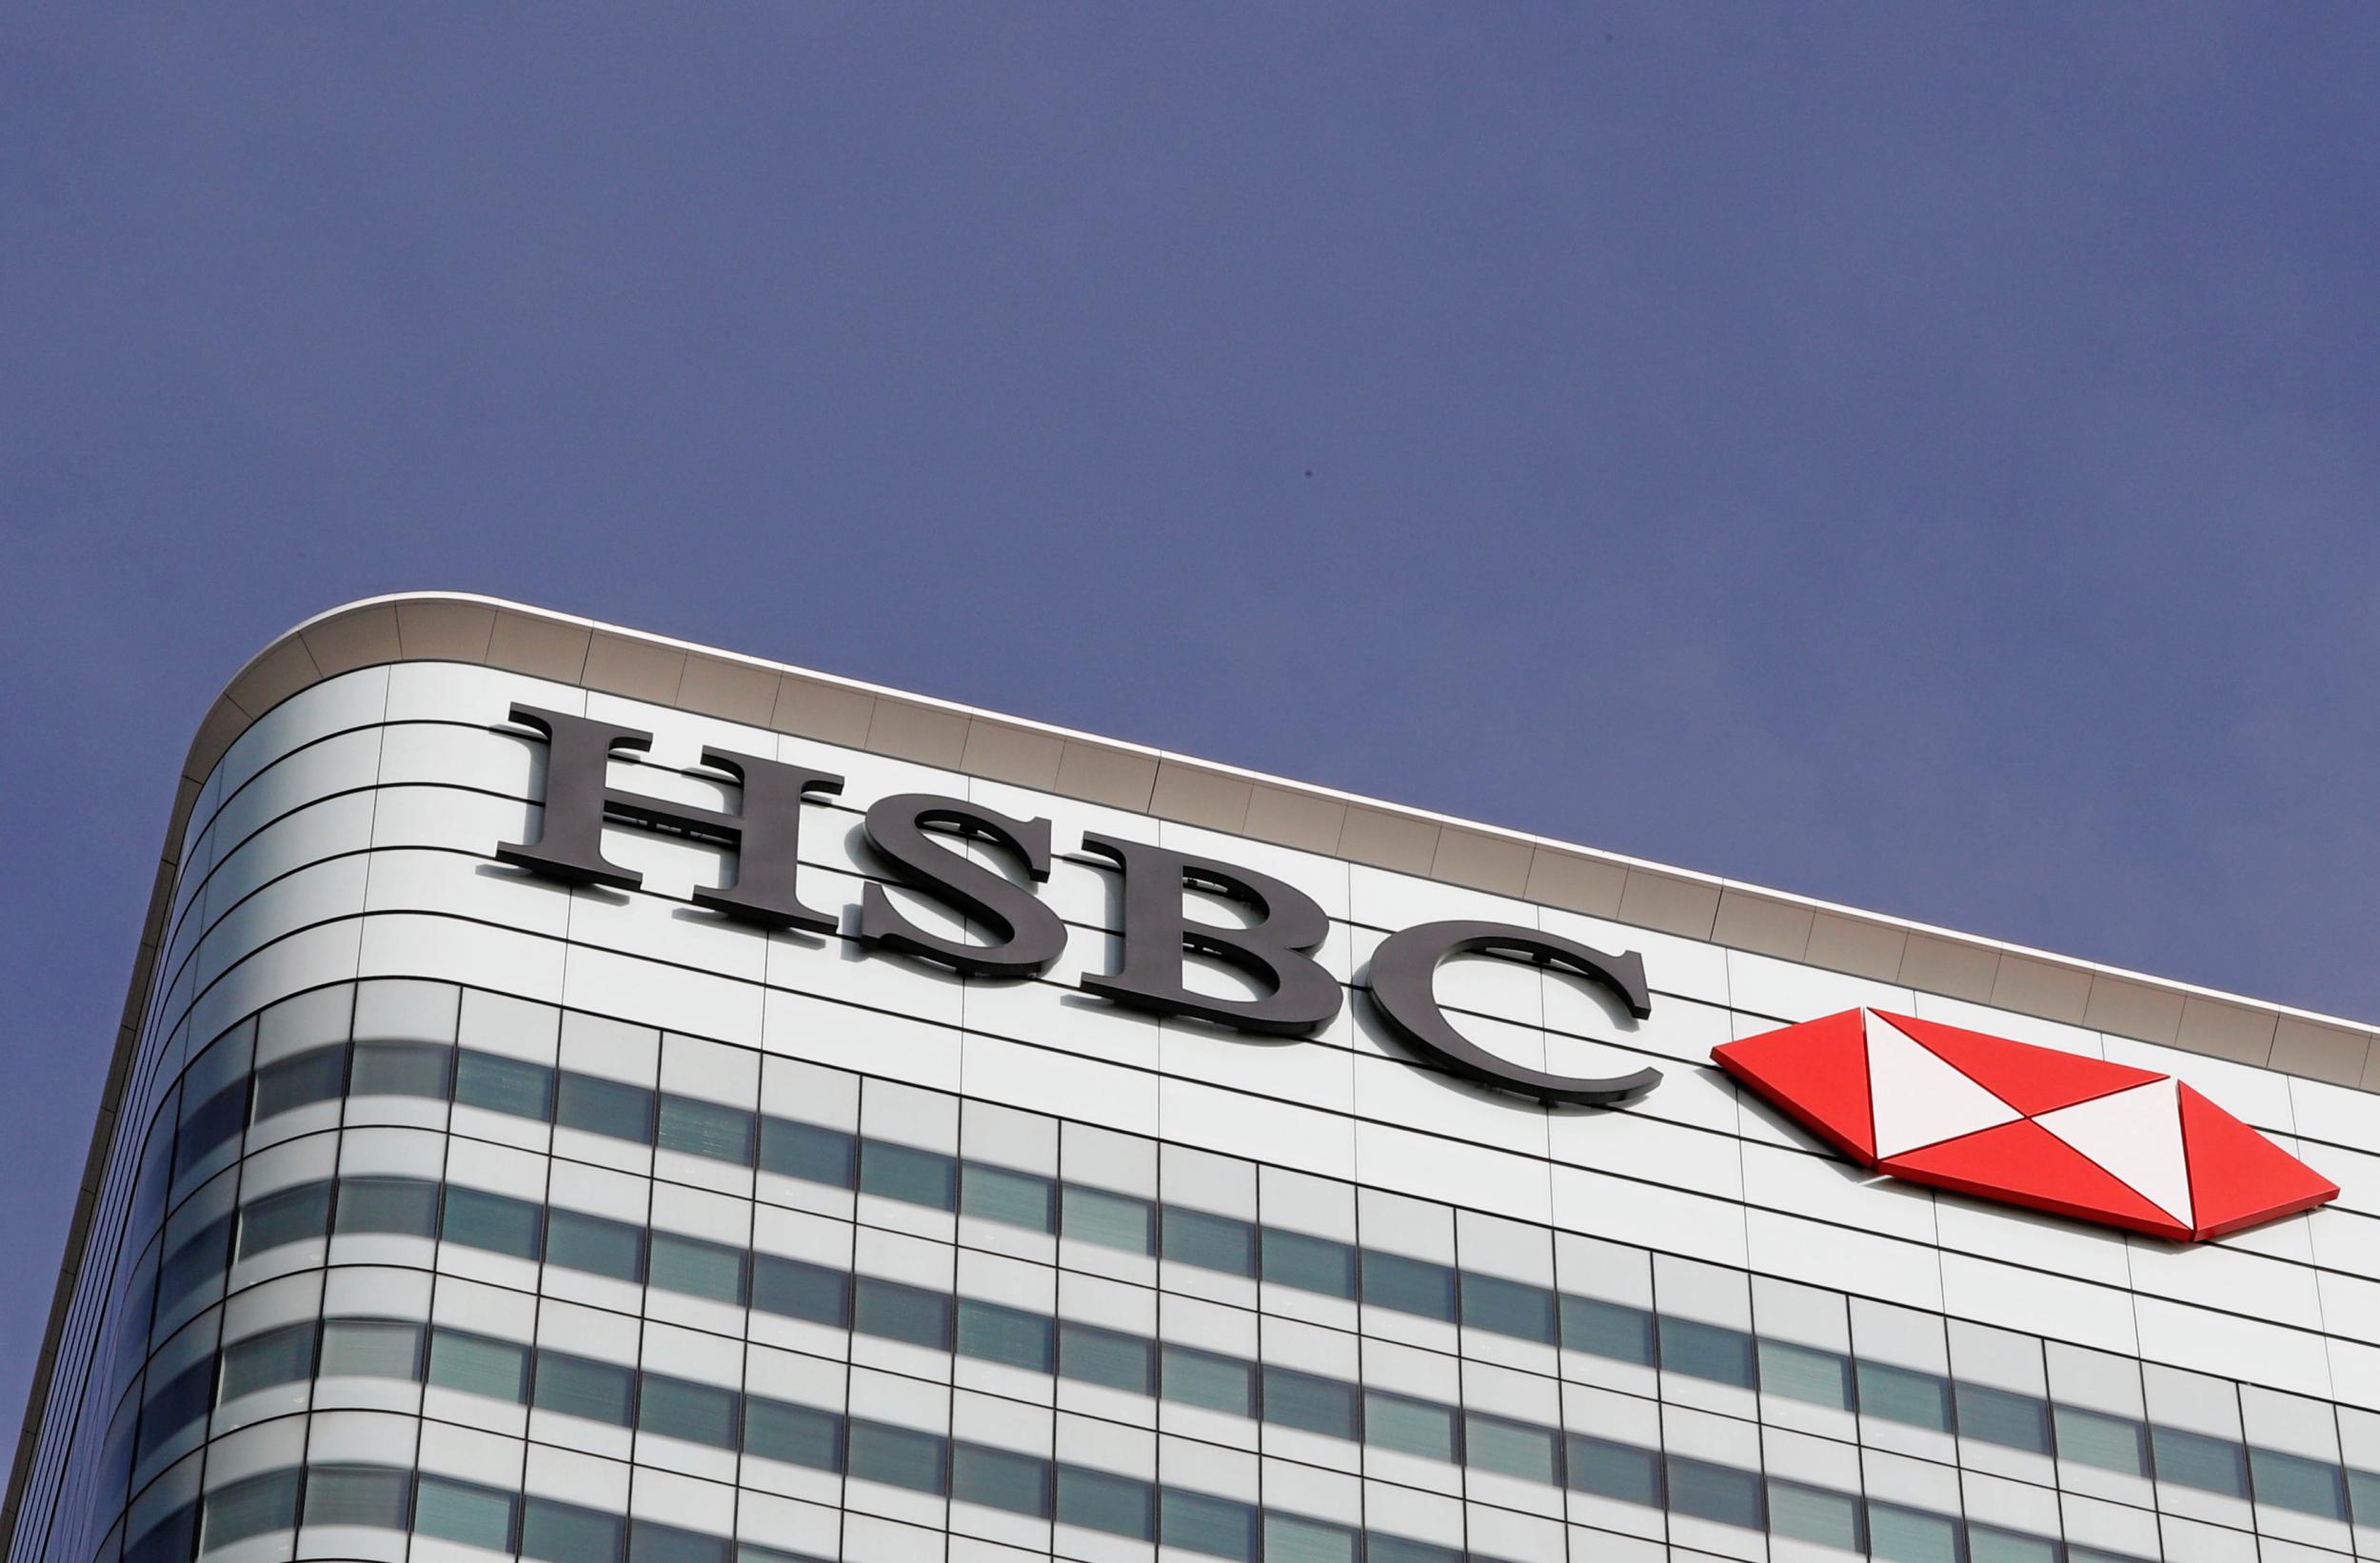 The special deal has sparked anger from HSBC staff in Hong Kong and in London